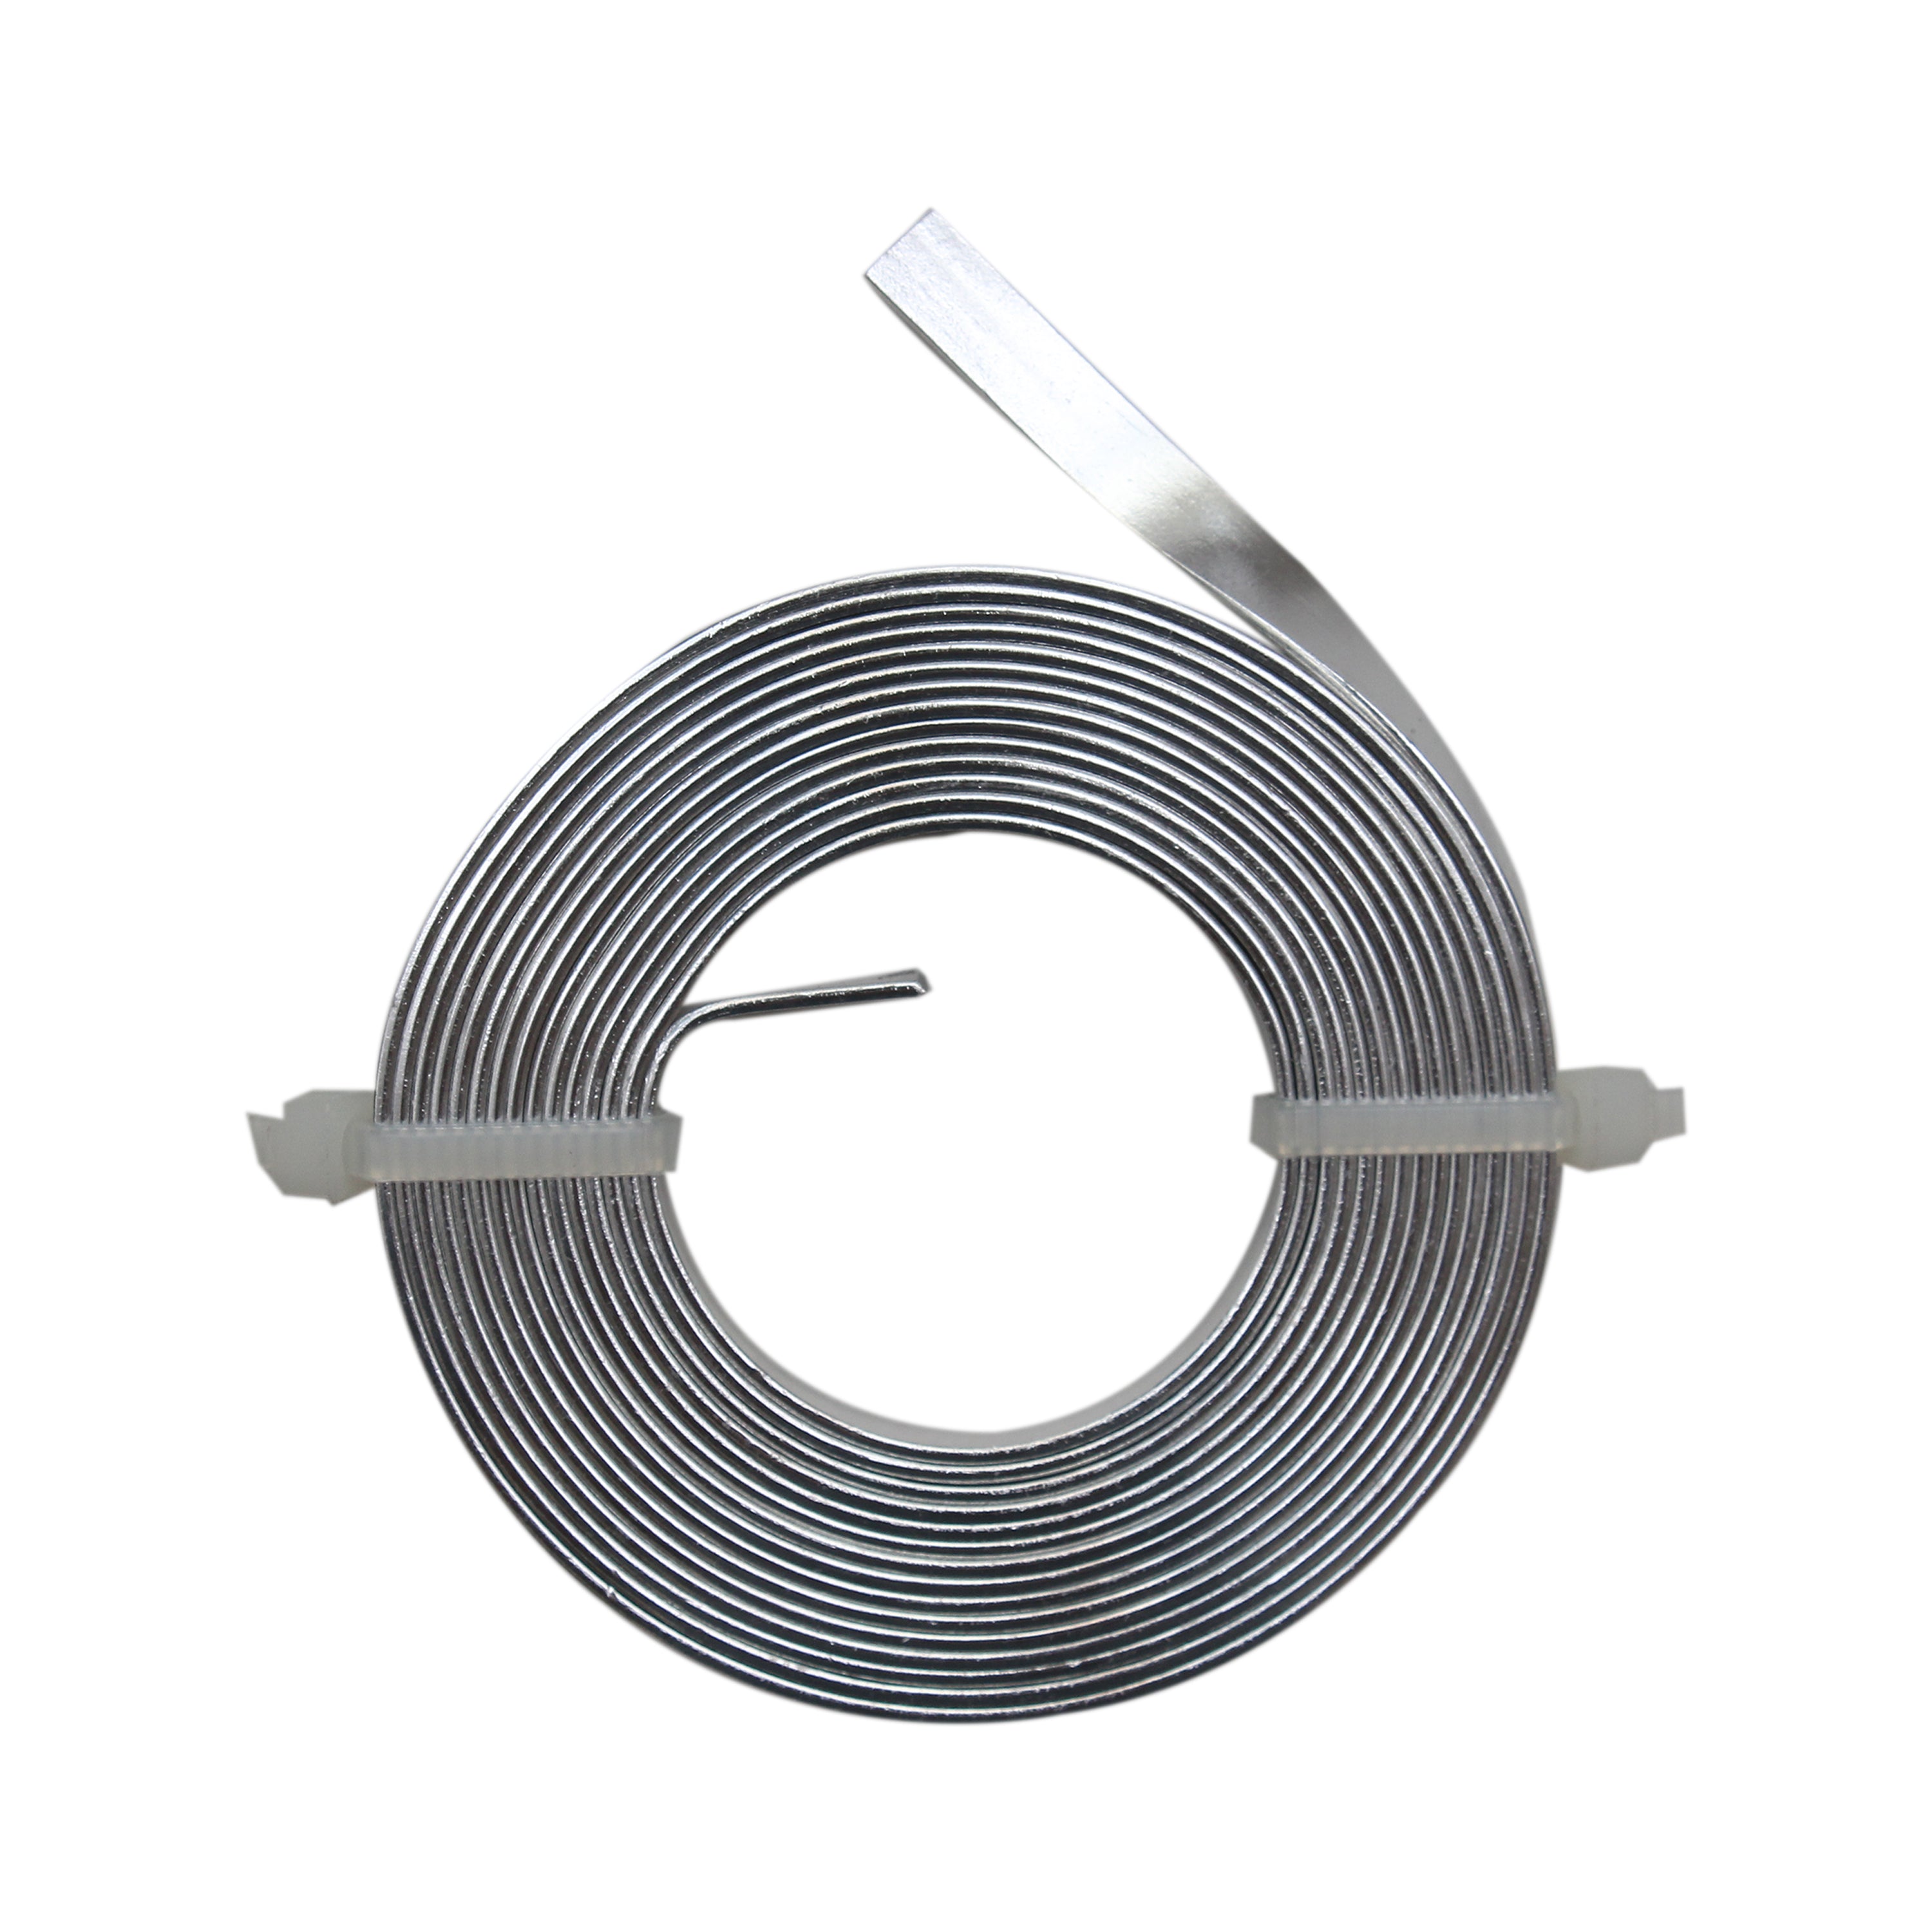 Easy Bend Craft Wire Flat 2mtr x 5mm